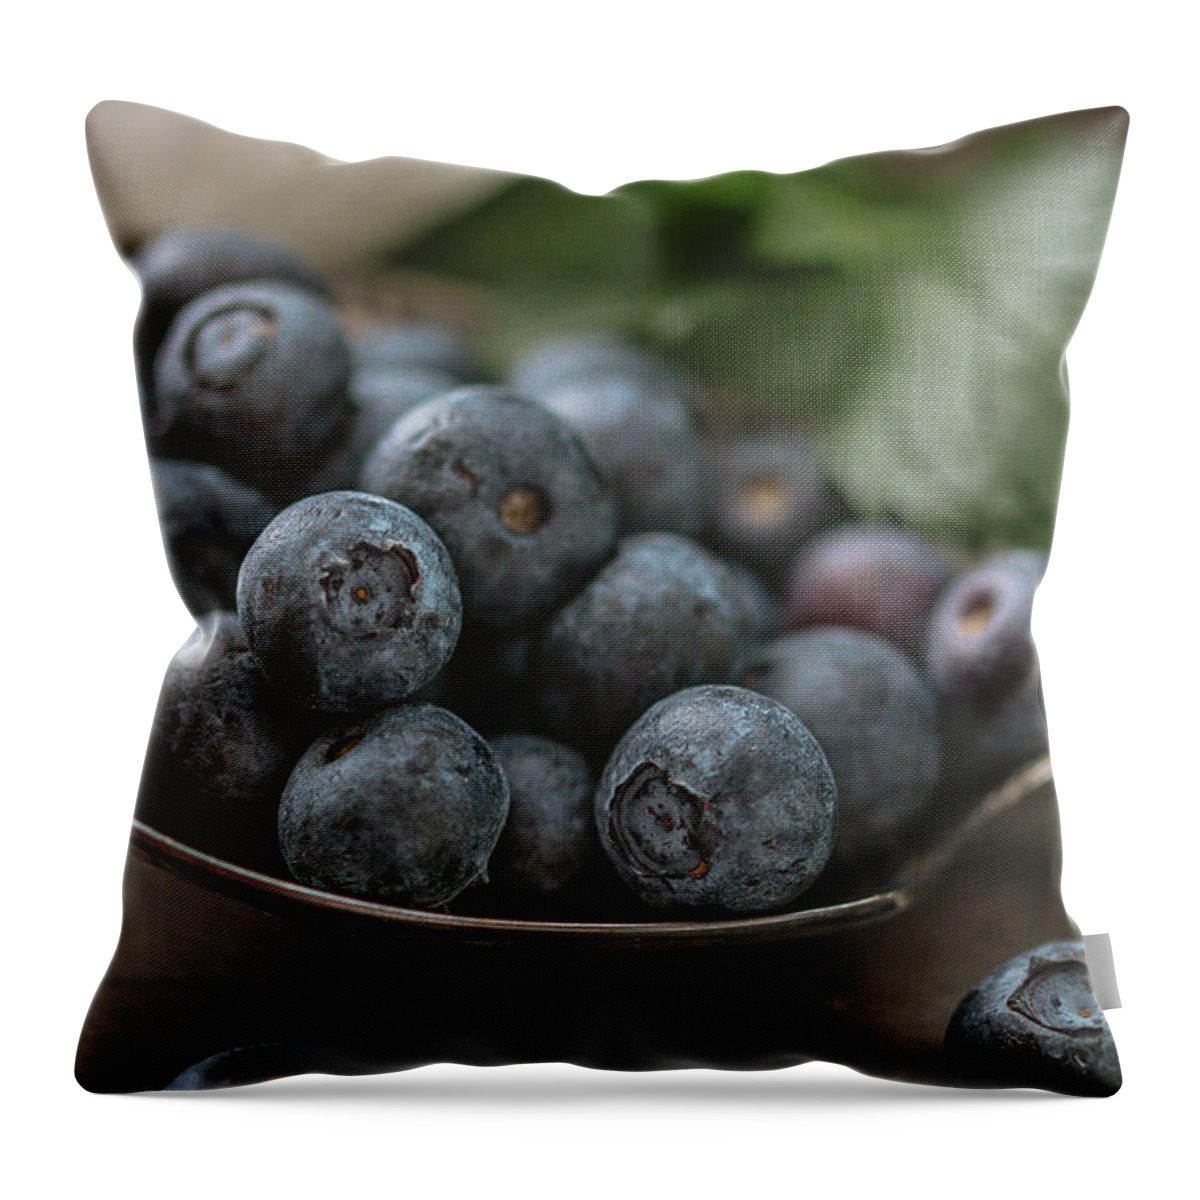 Fruit Throw Pillow featuring the photograph Berries by the Spoonful by Teresa Wilson